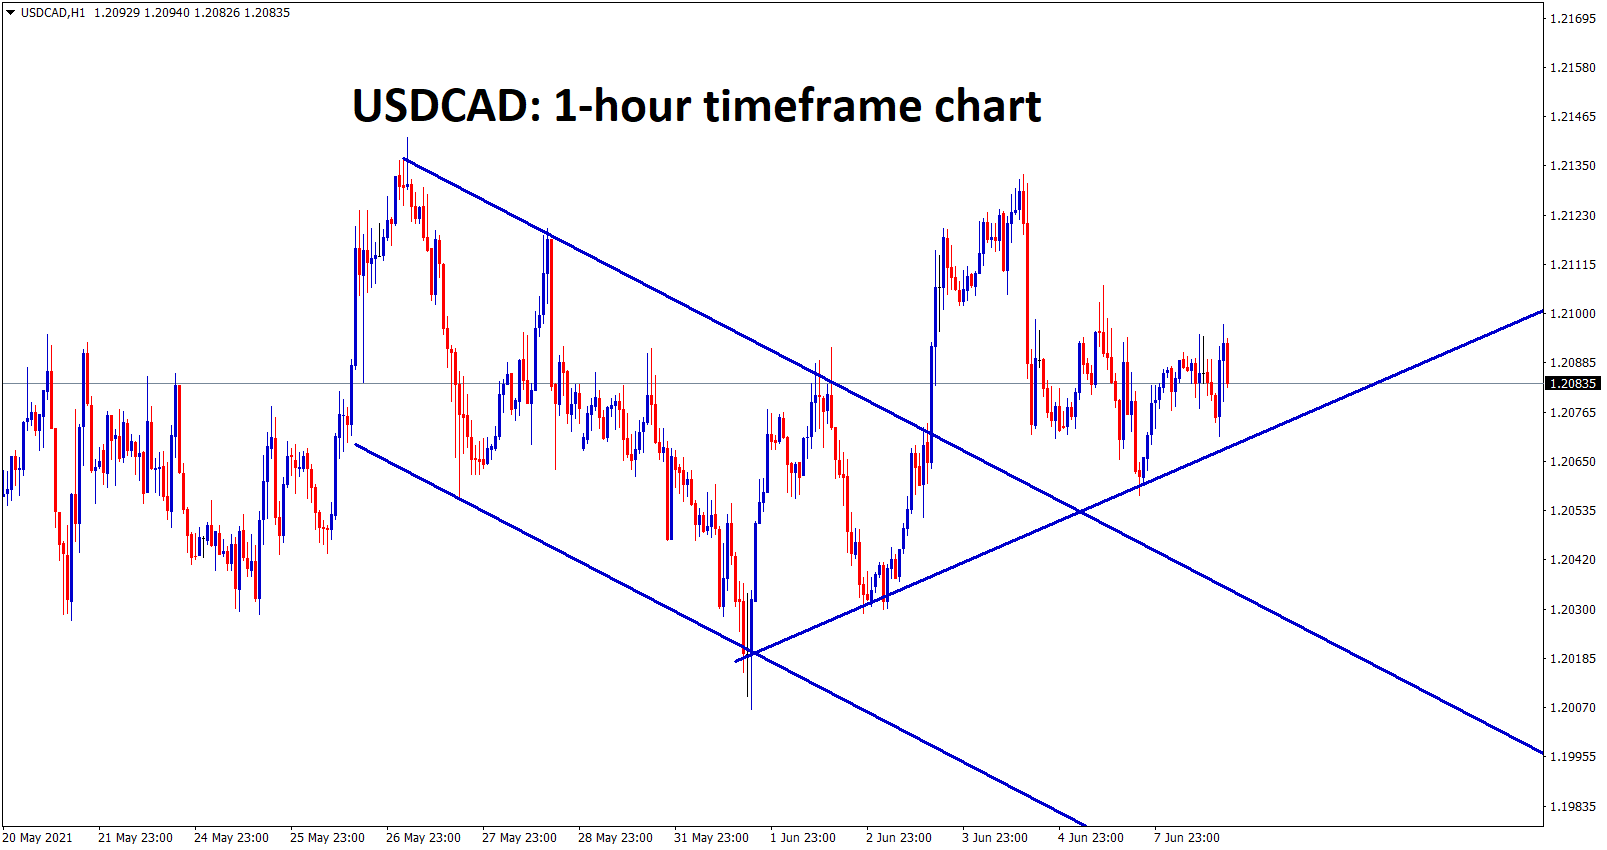 USDCAD broken the downtrend line and market moving now in an Uptrend